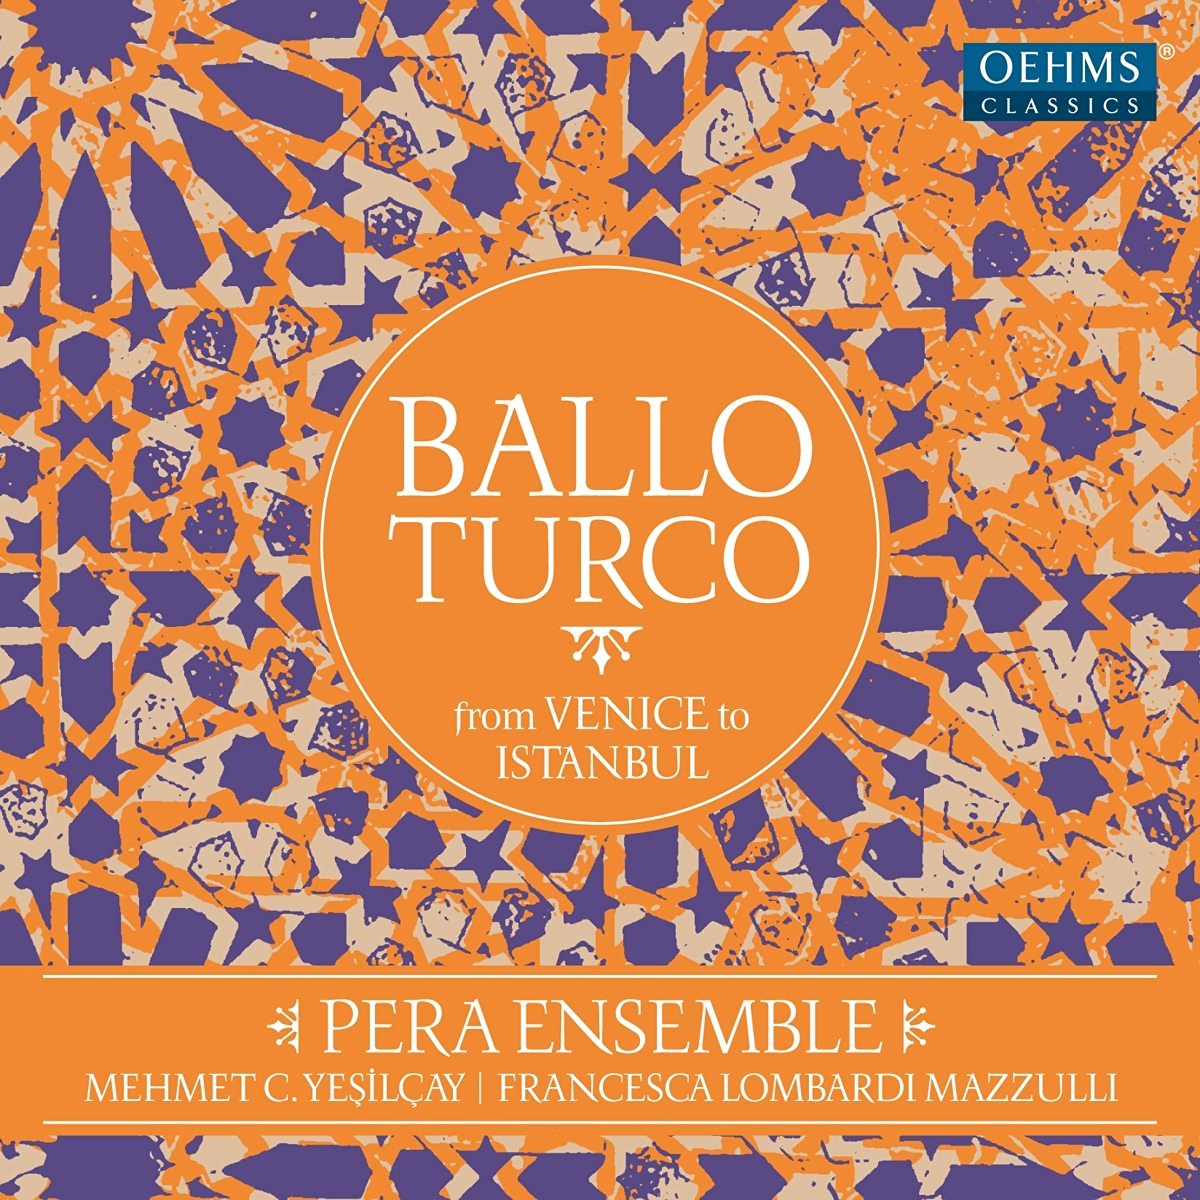 IN REVIEW: BALLO TURCO - From Venice to Istanbul (Oehms Classics OC 1858 / OC 1860)